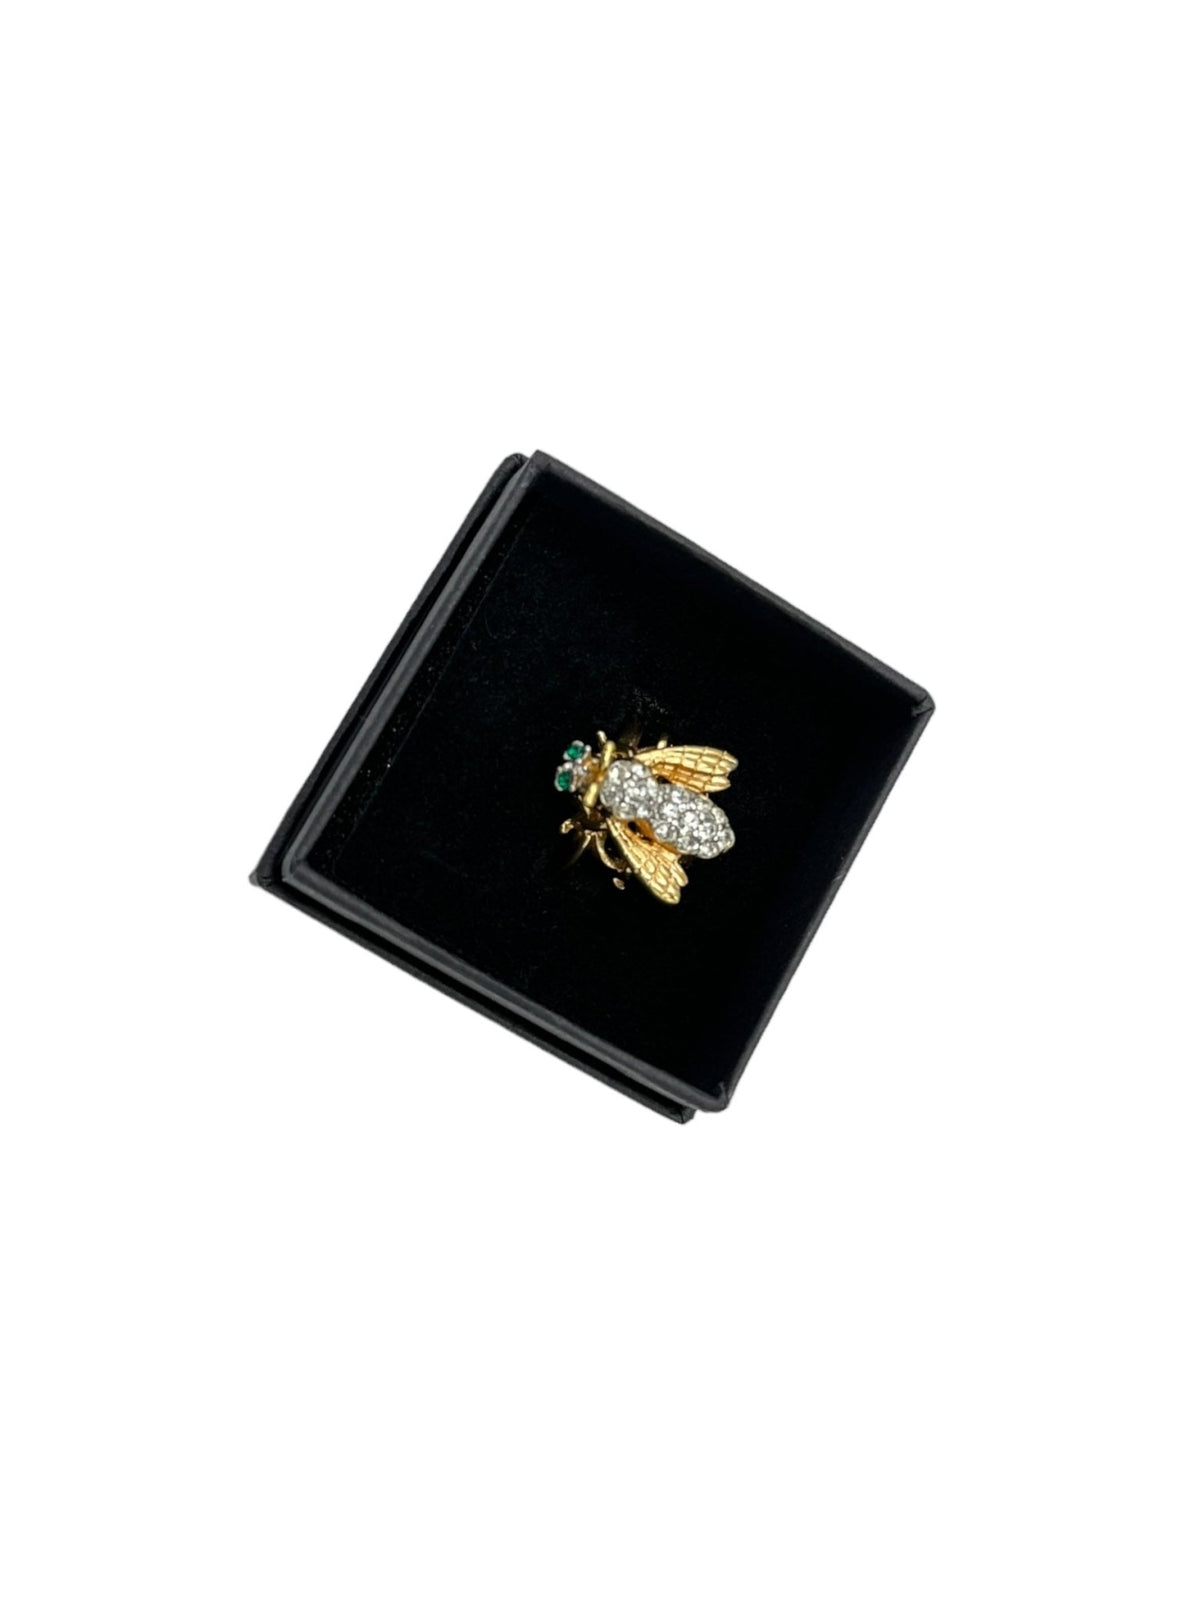 Gold Rhinestone Bee Statement Cocktail Ring - 24 Wishes Vintage Jewelry